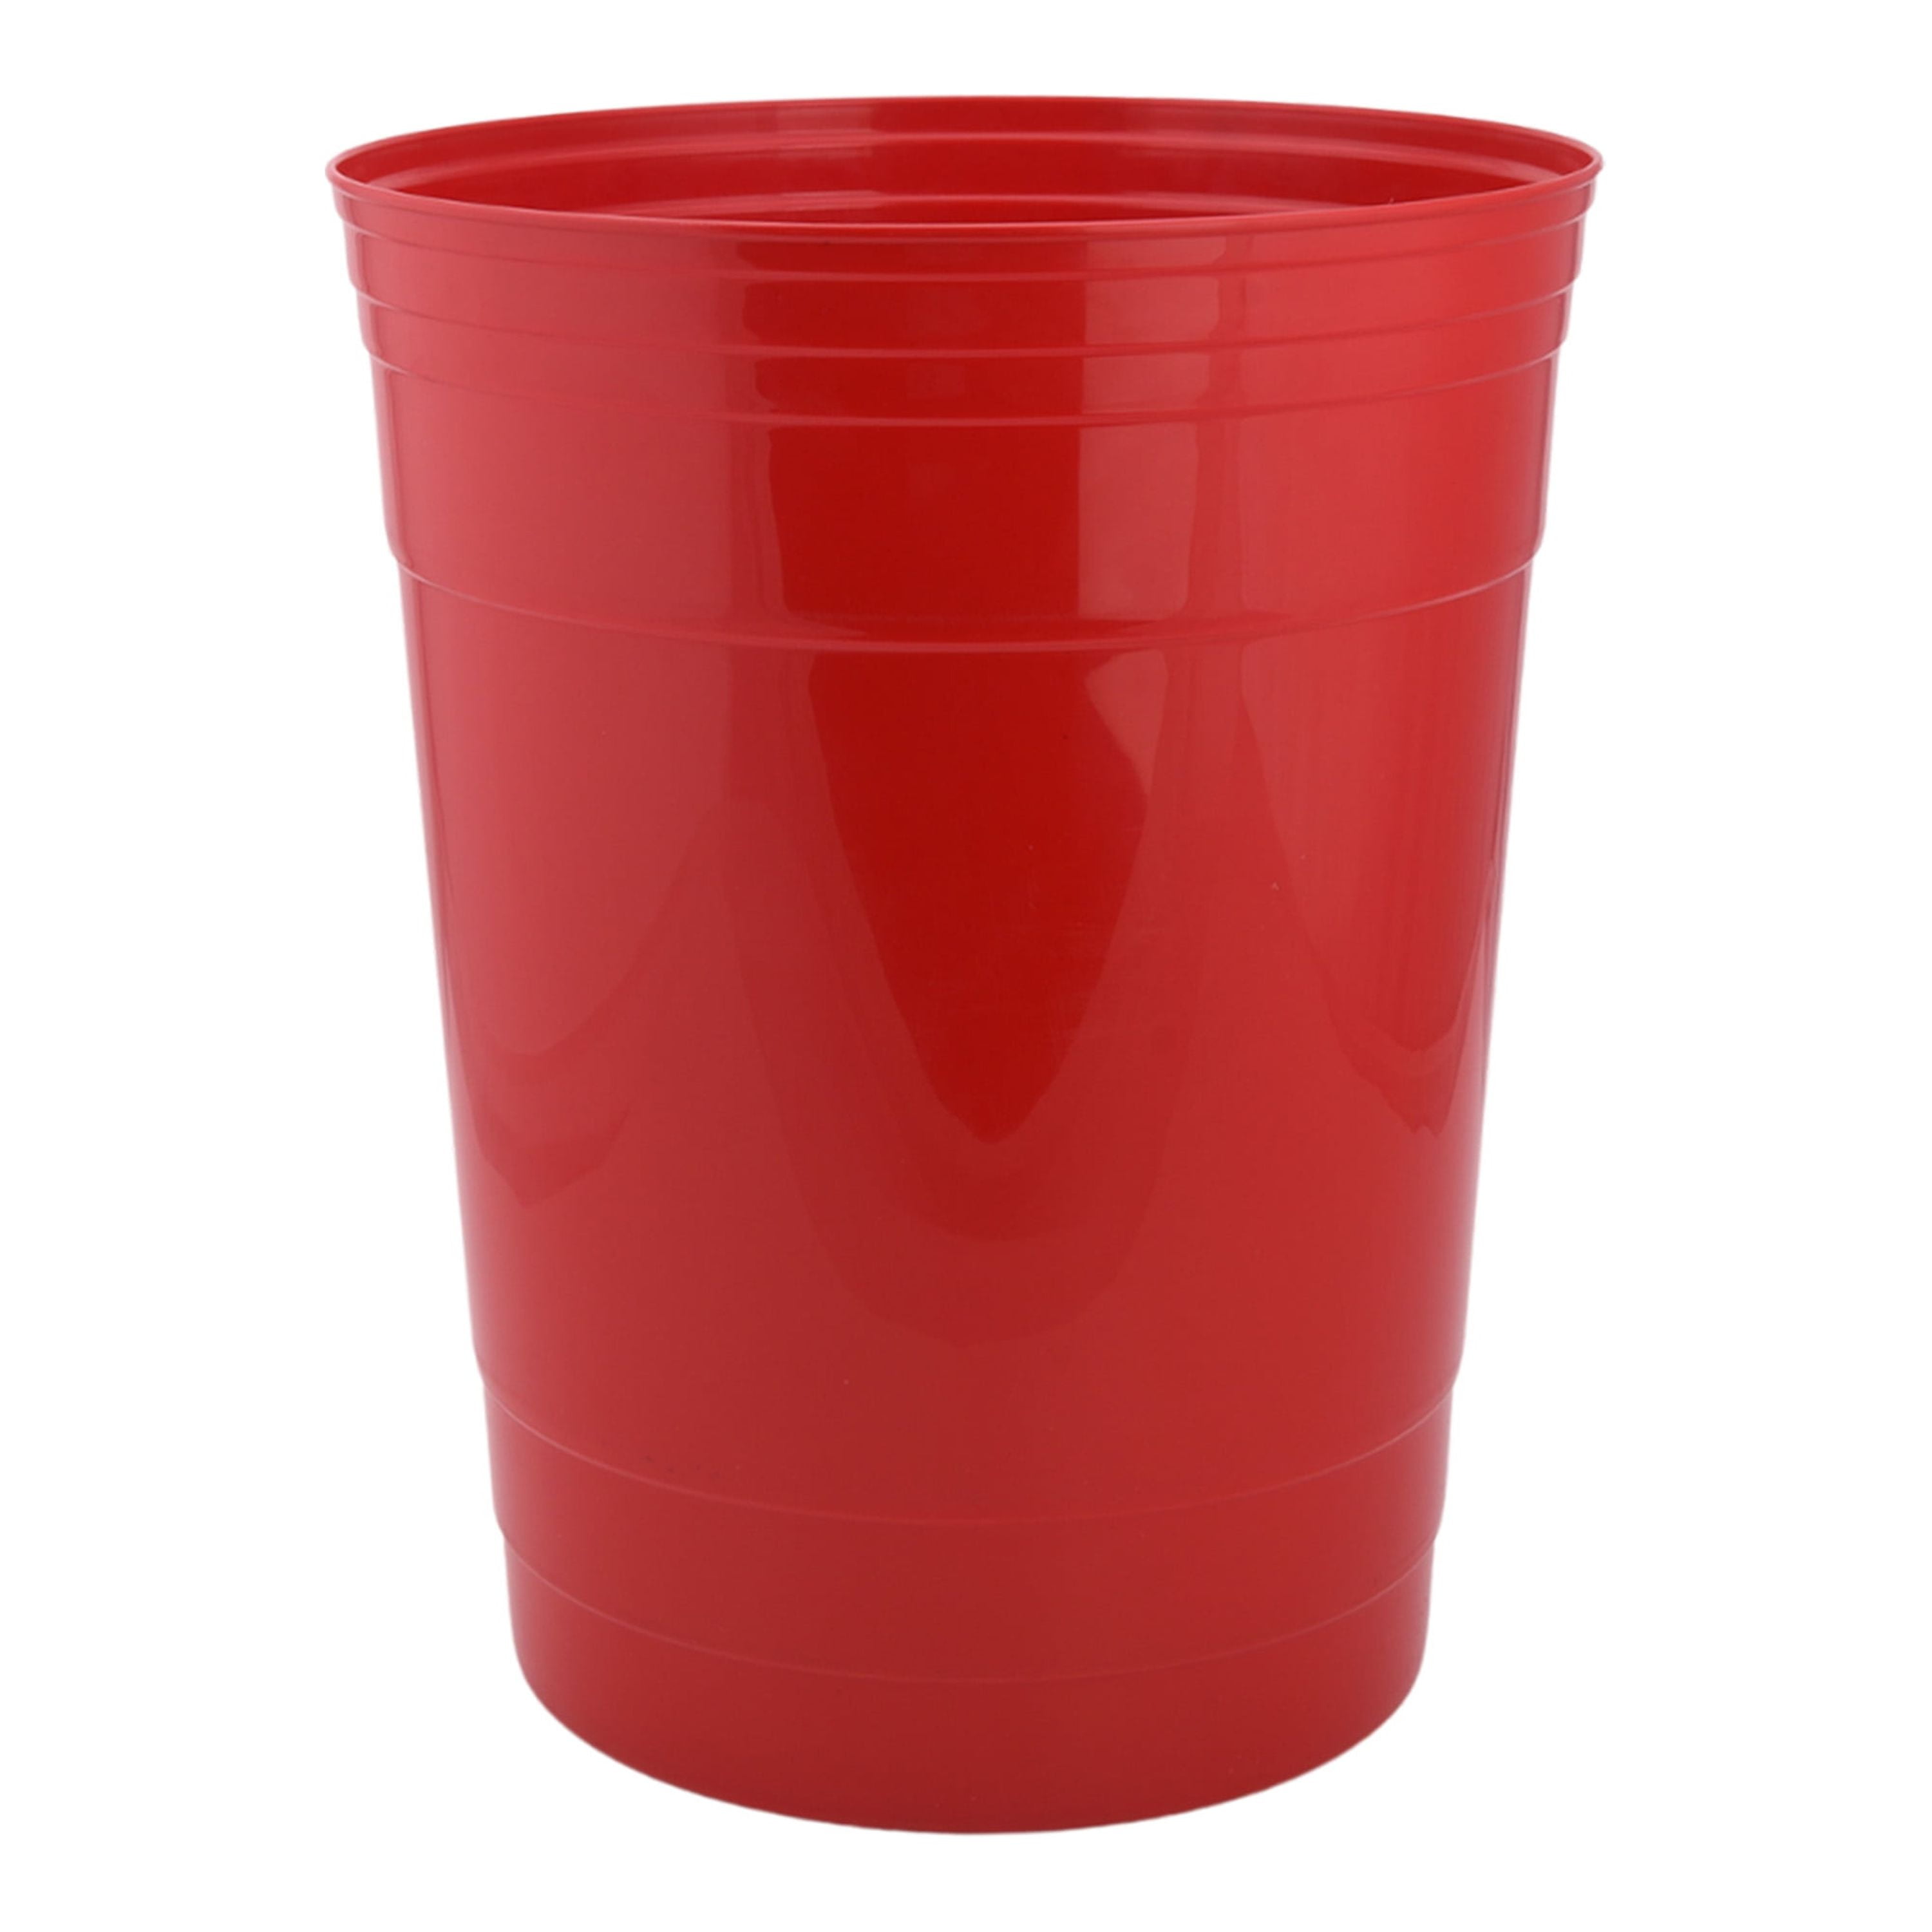 3 Gallon Red Cup Trash Can, Plastic Office Trash Can, Pack of 6